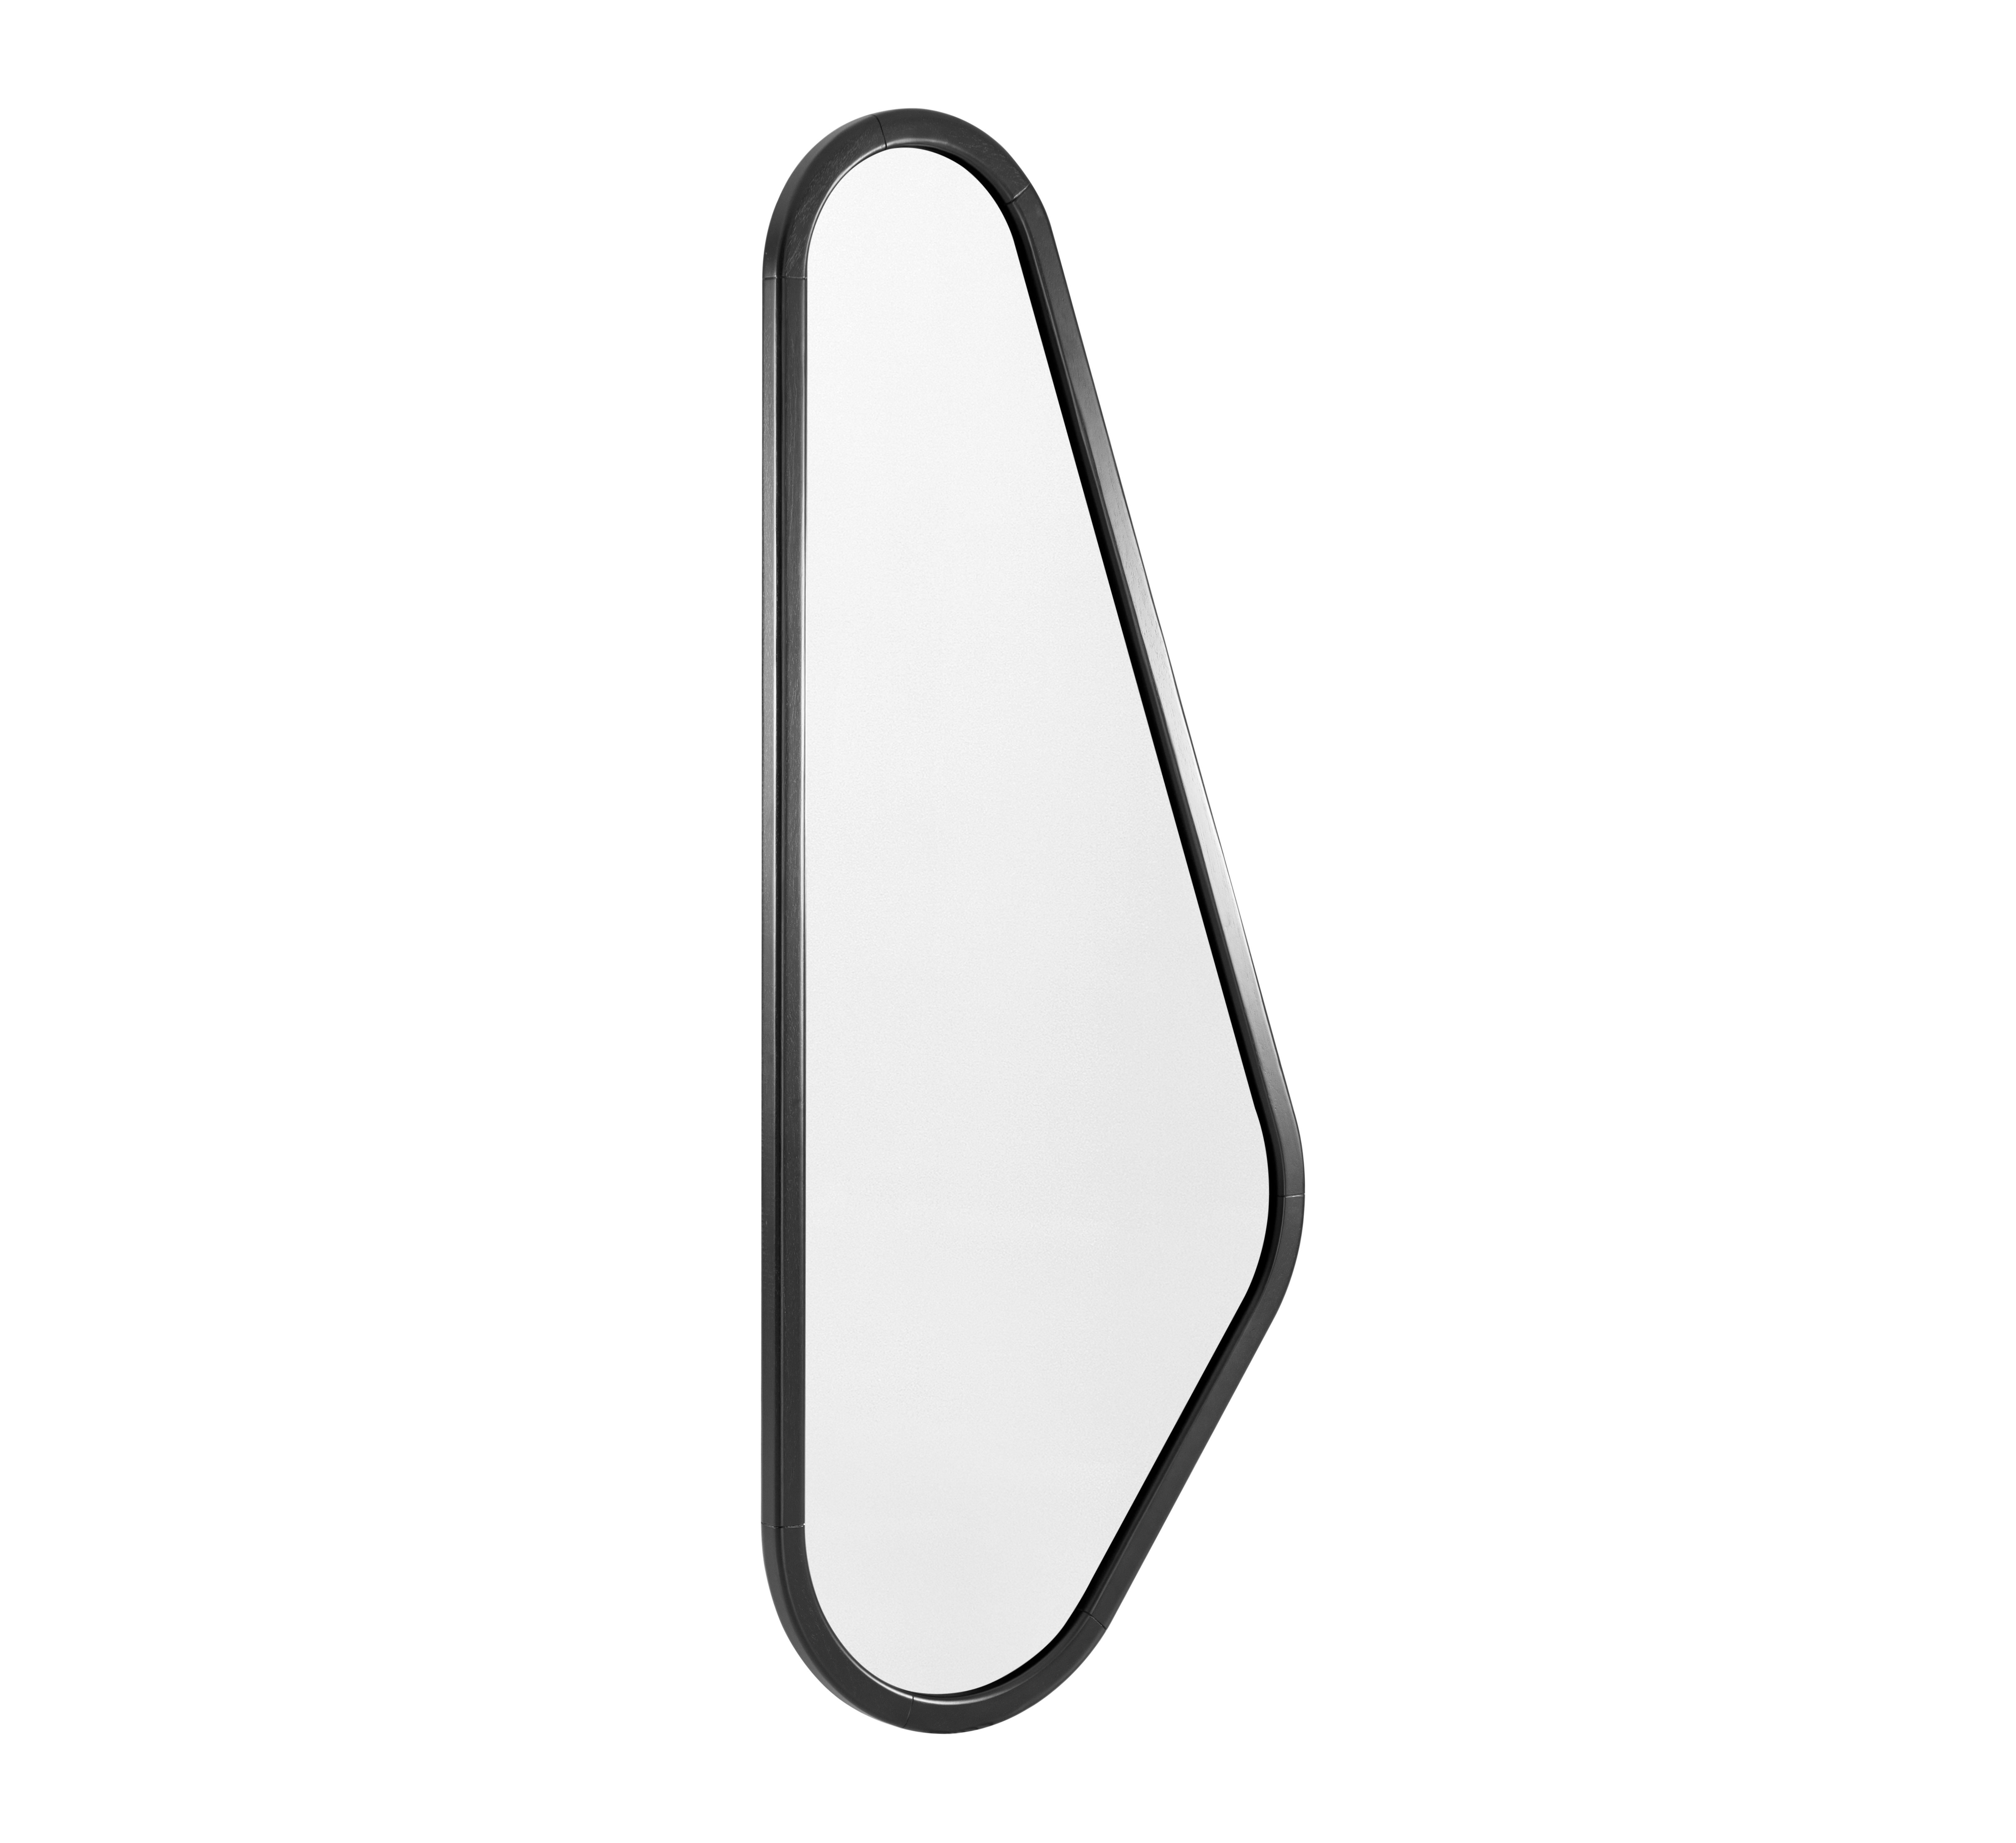 With a light and refined design, the Ali mirror series incorporates a natural touch into any area of the home. Ali, which is the Italian word for ‘wings’, refers to the piece’s unique design. Together, the mirrors form two wings that bring a sense